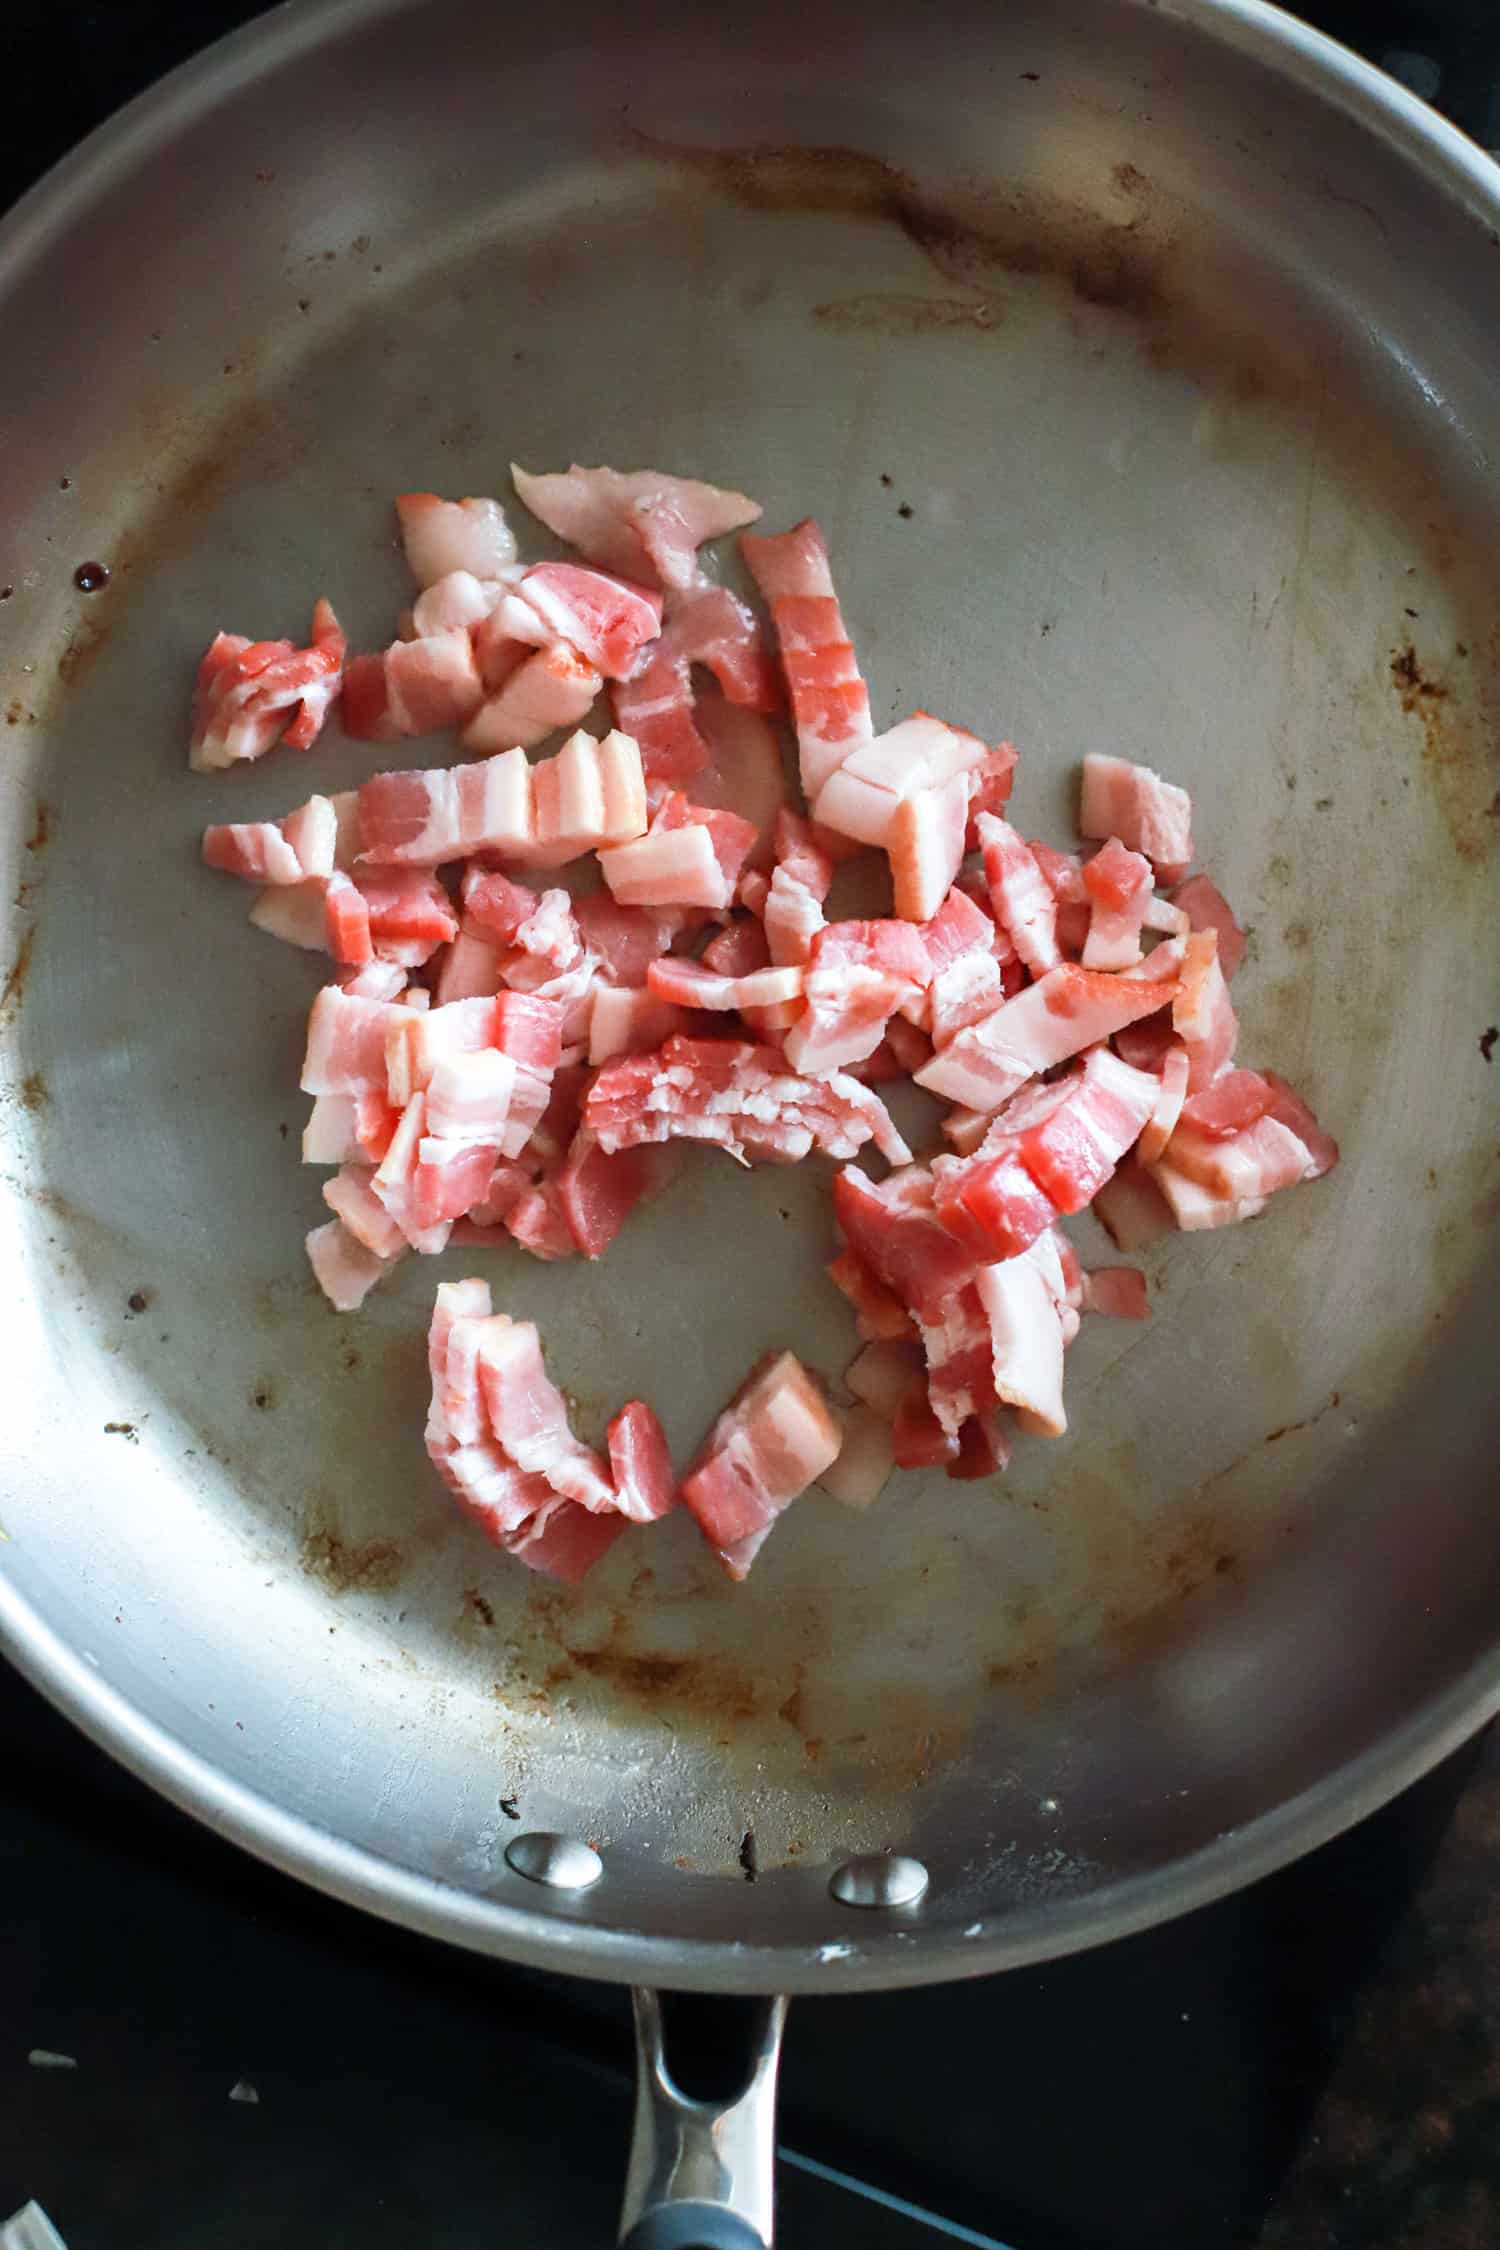 Raw bacon in large skillet before frying.